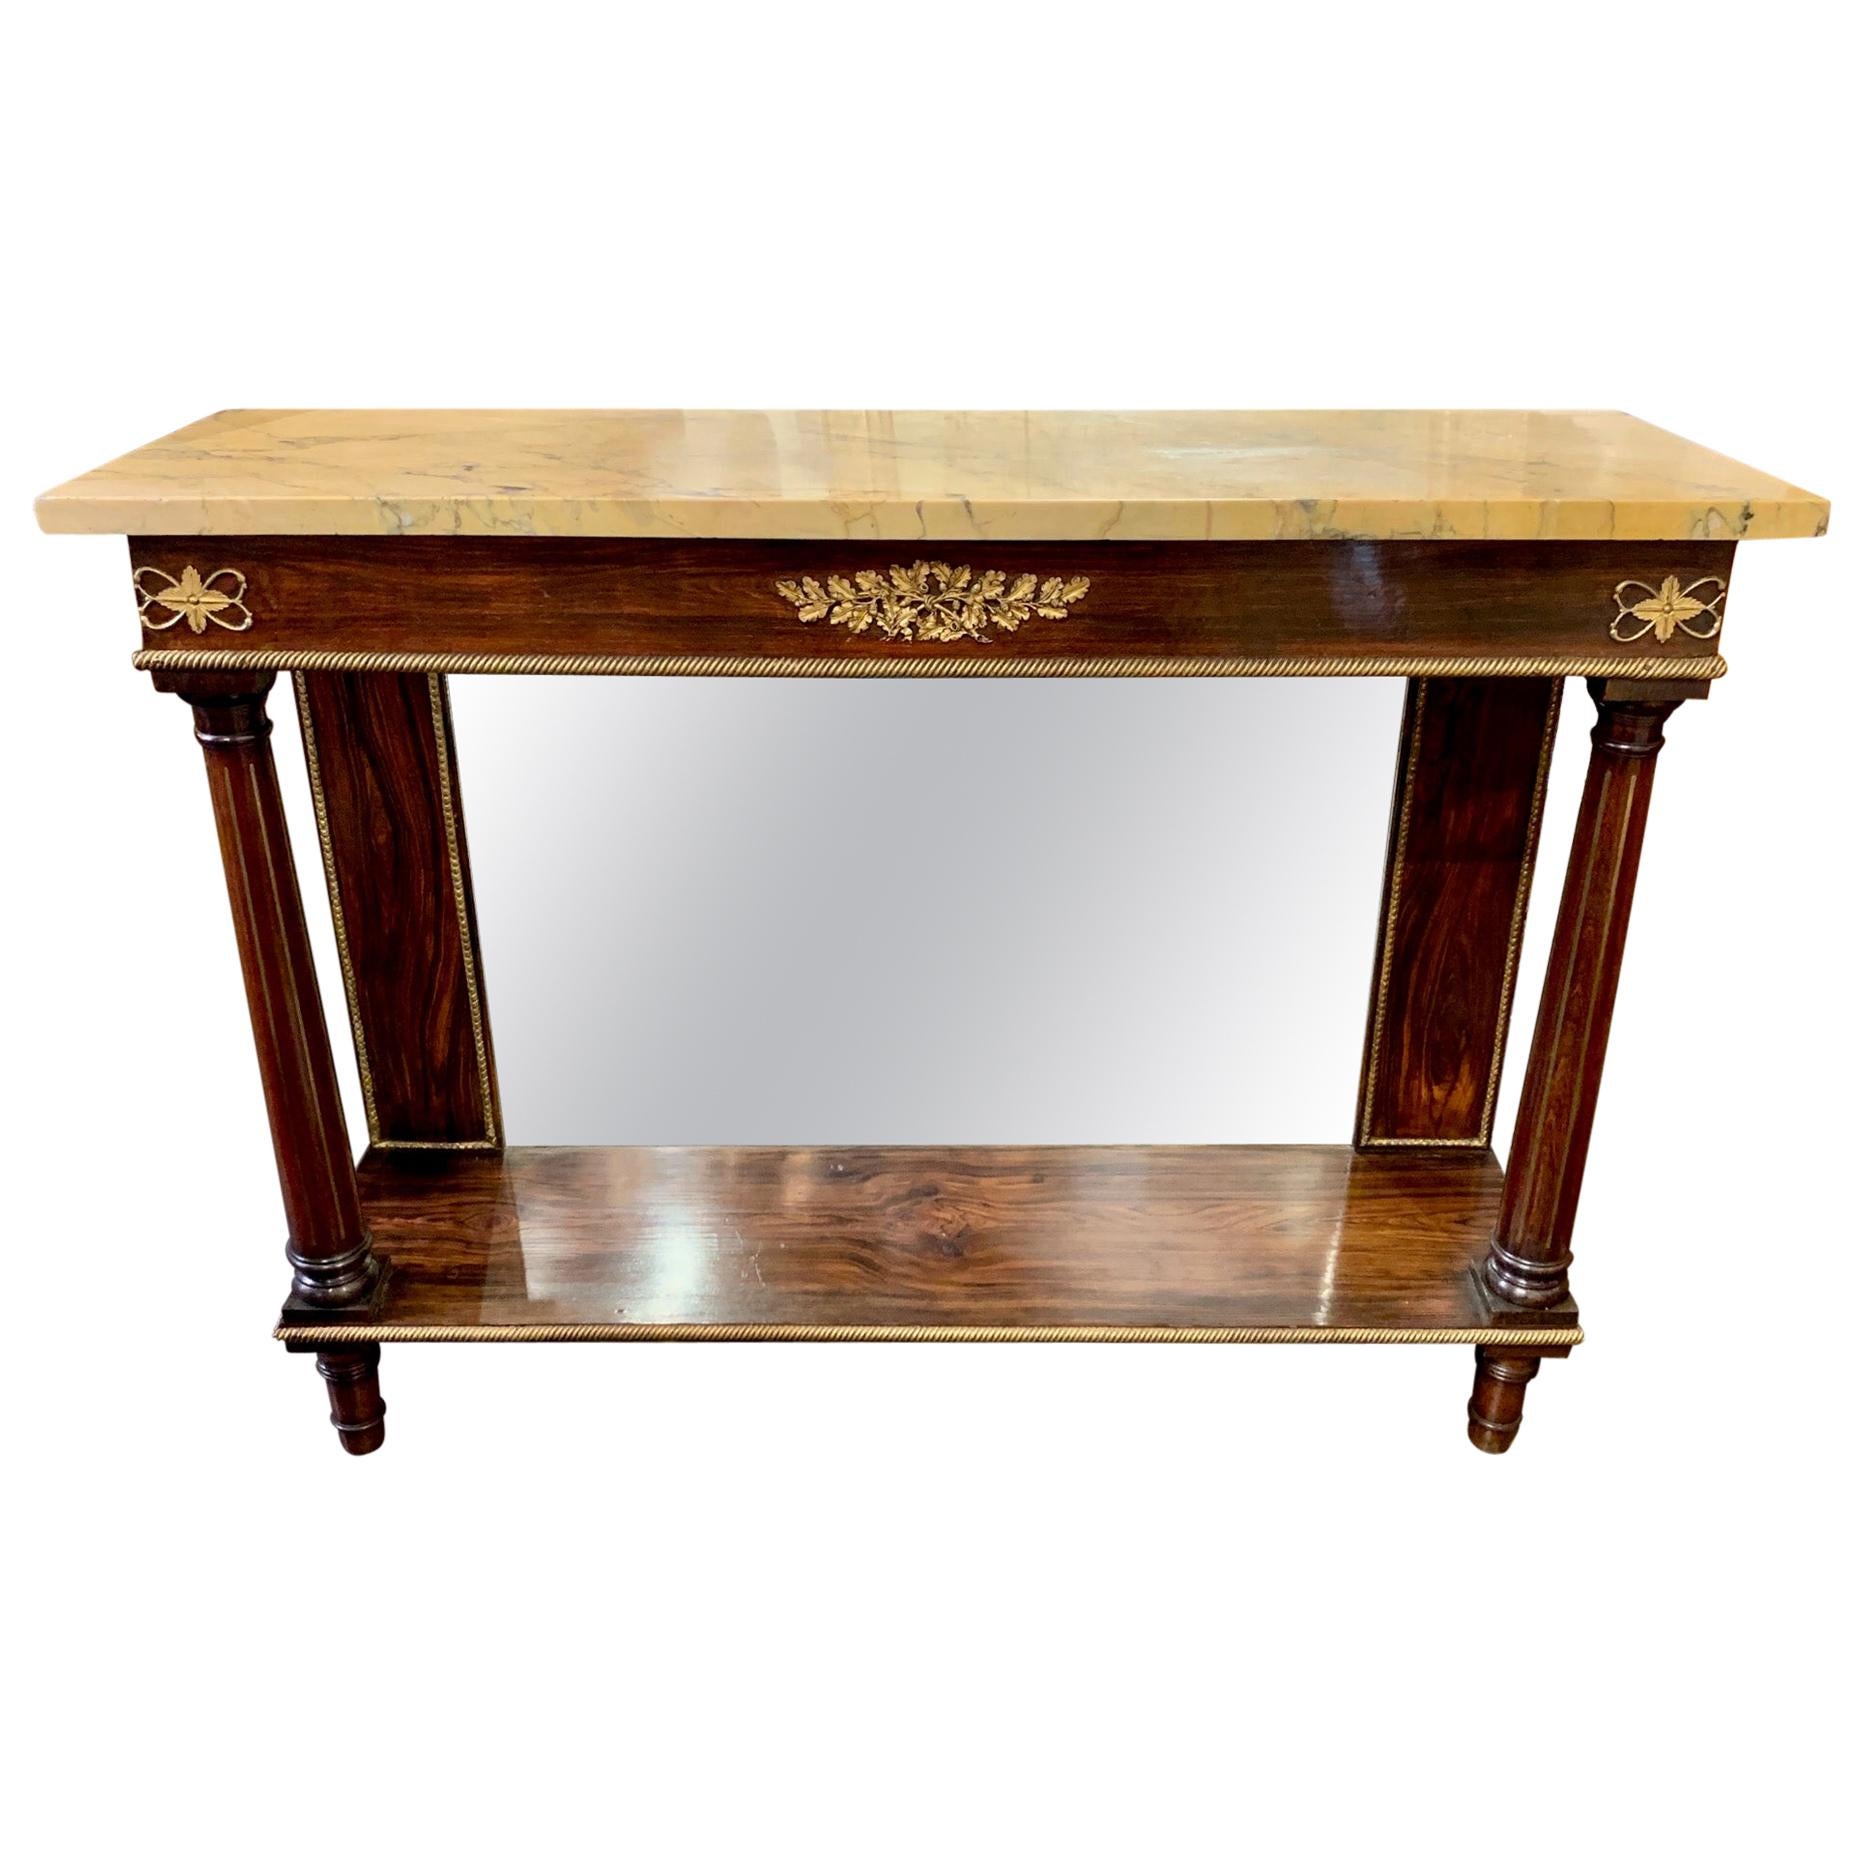 19th Century French Empire Rosewood Console with Sienna Marble Top